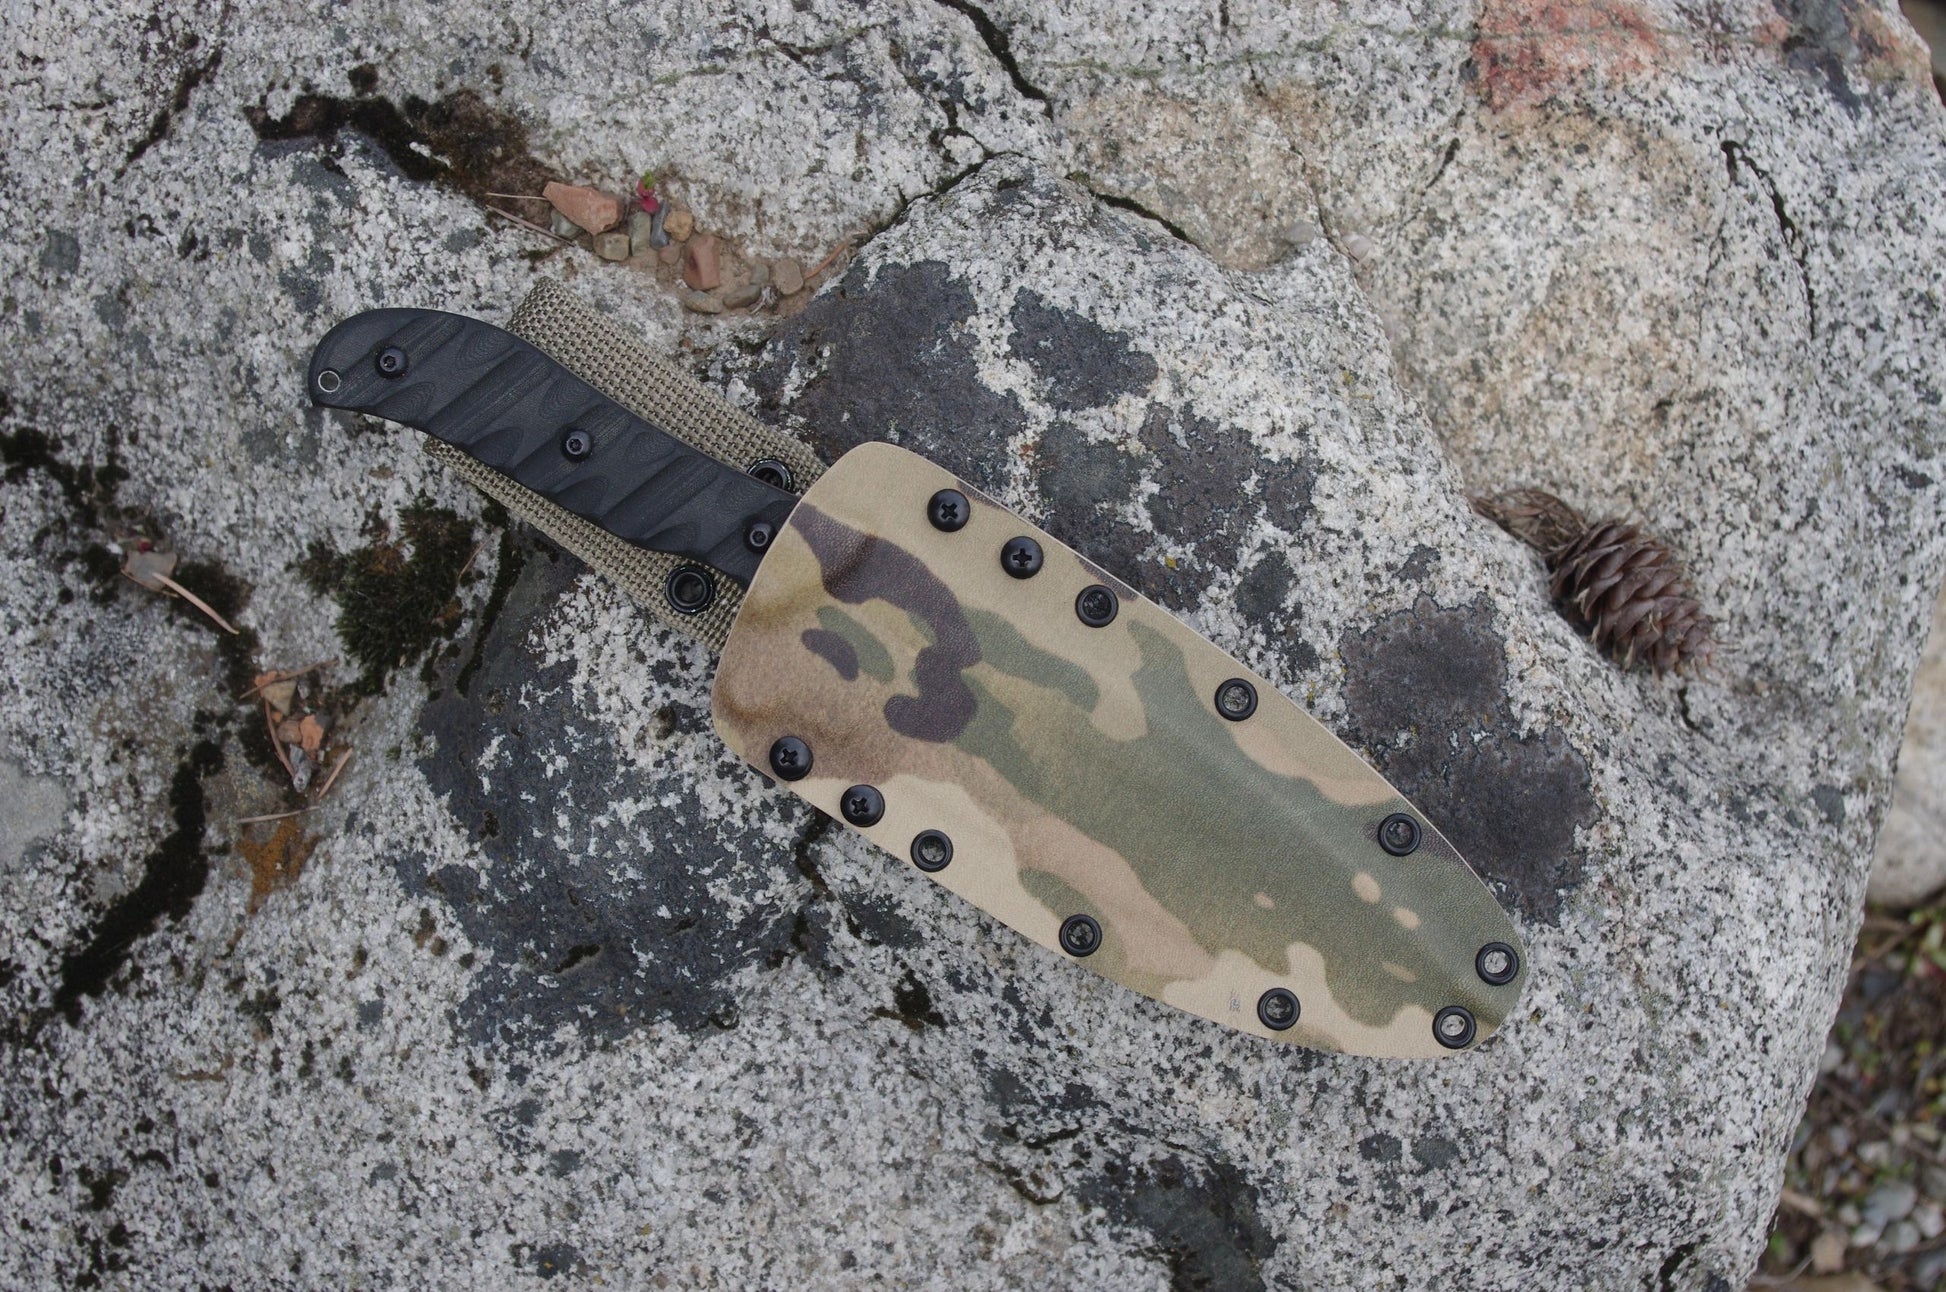 TOPS KNIVES SILENT HERO CUSTOM KYDEX SHEATH BUILT YOUR WAY (KNIFE NOT INCLUDED)